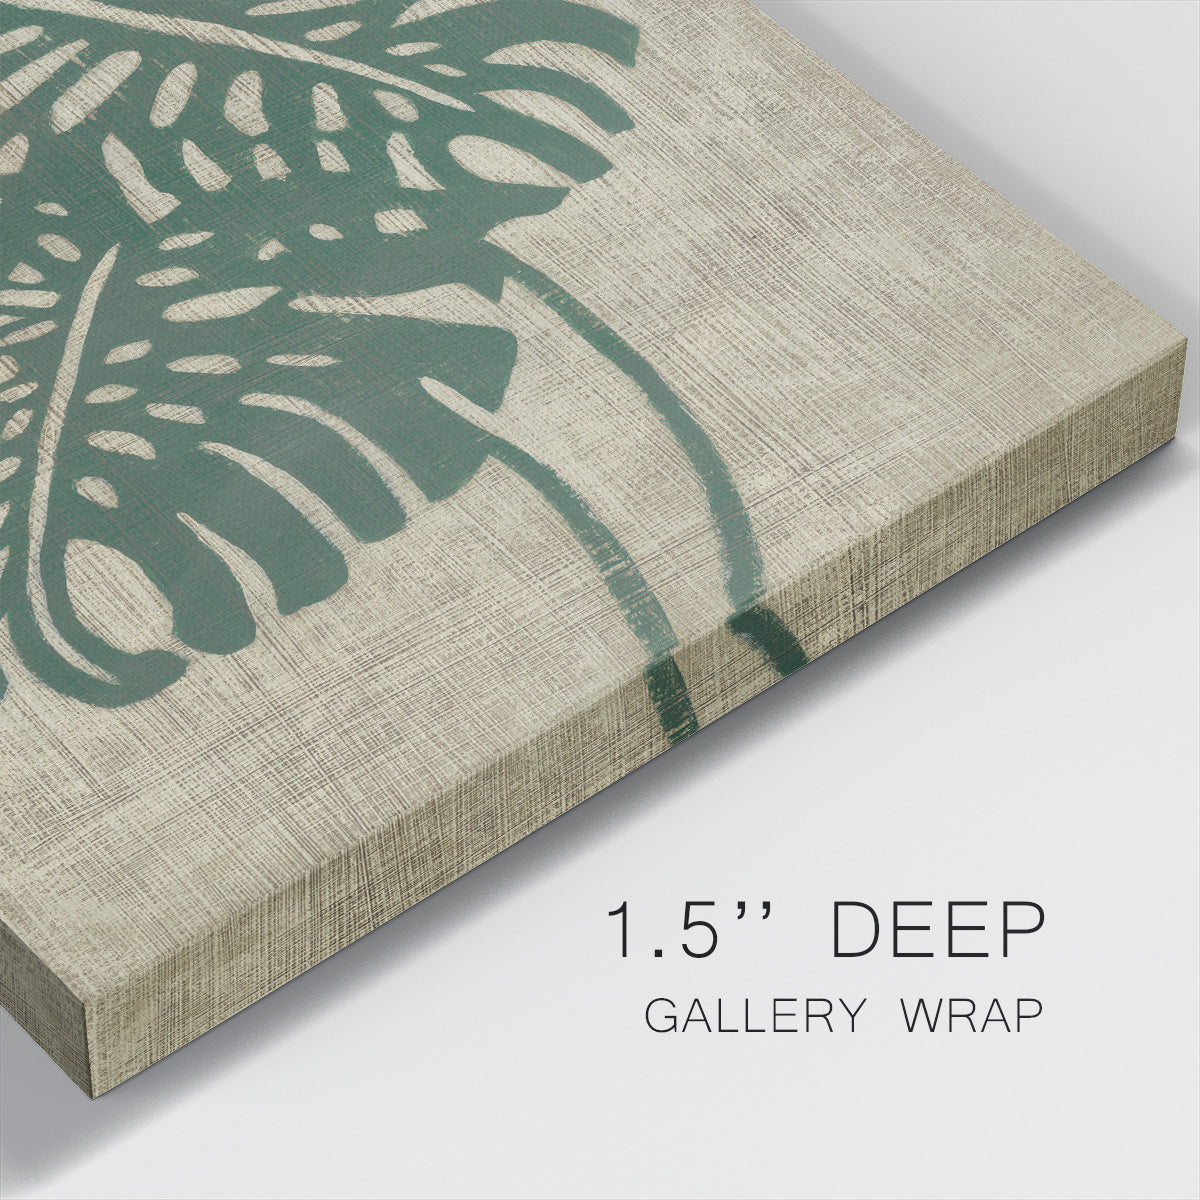 Vintage Greenery I-Premium Gallery Wrapped Canvas - Ready to Hang